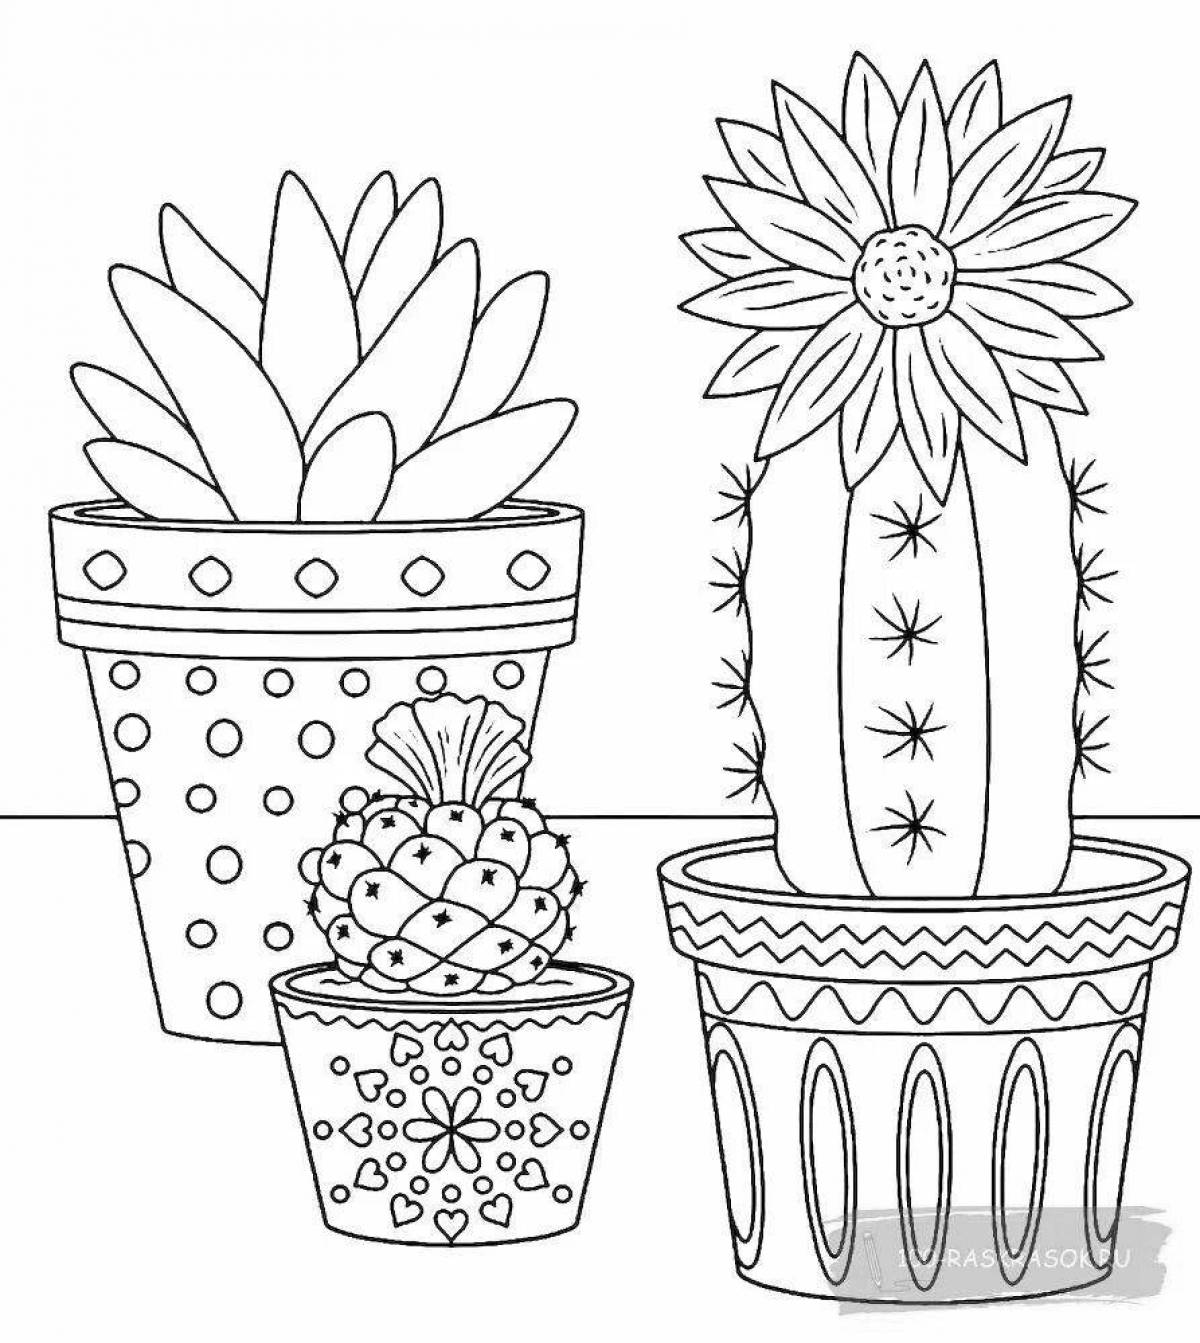 Large houseplants coloring page for 6-7 year olds